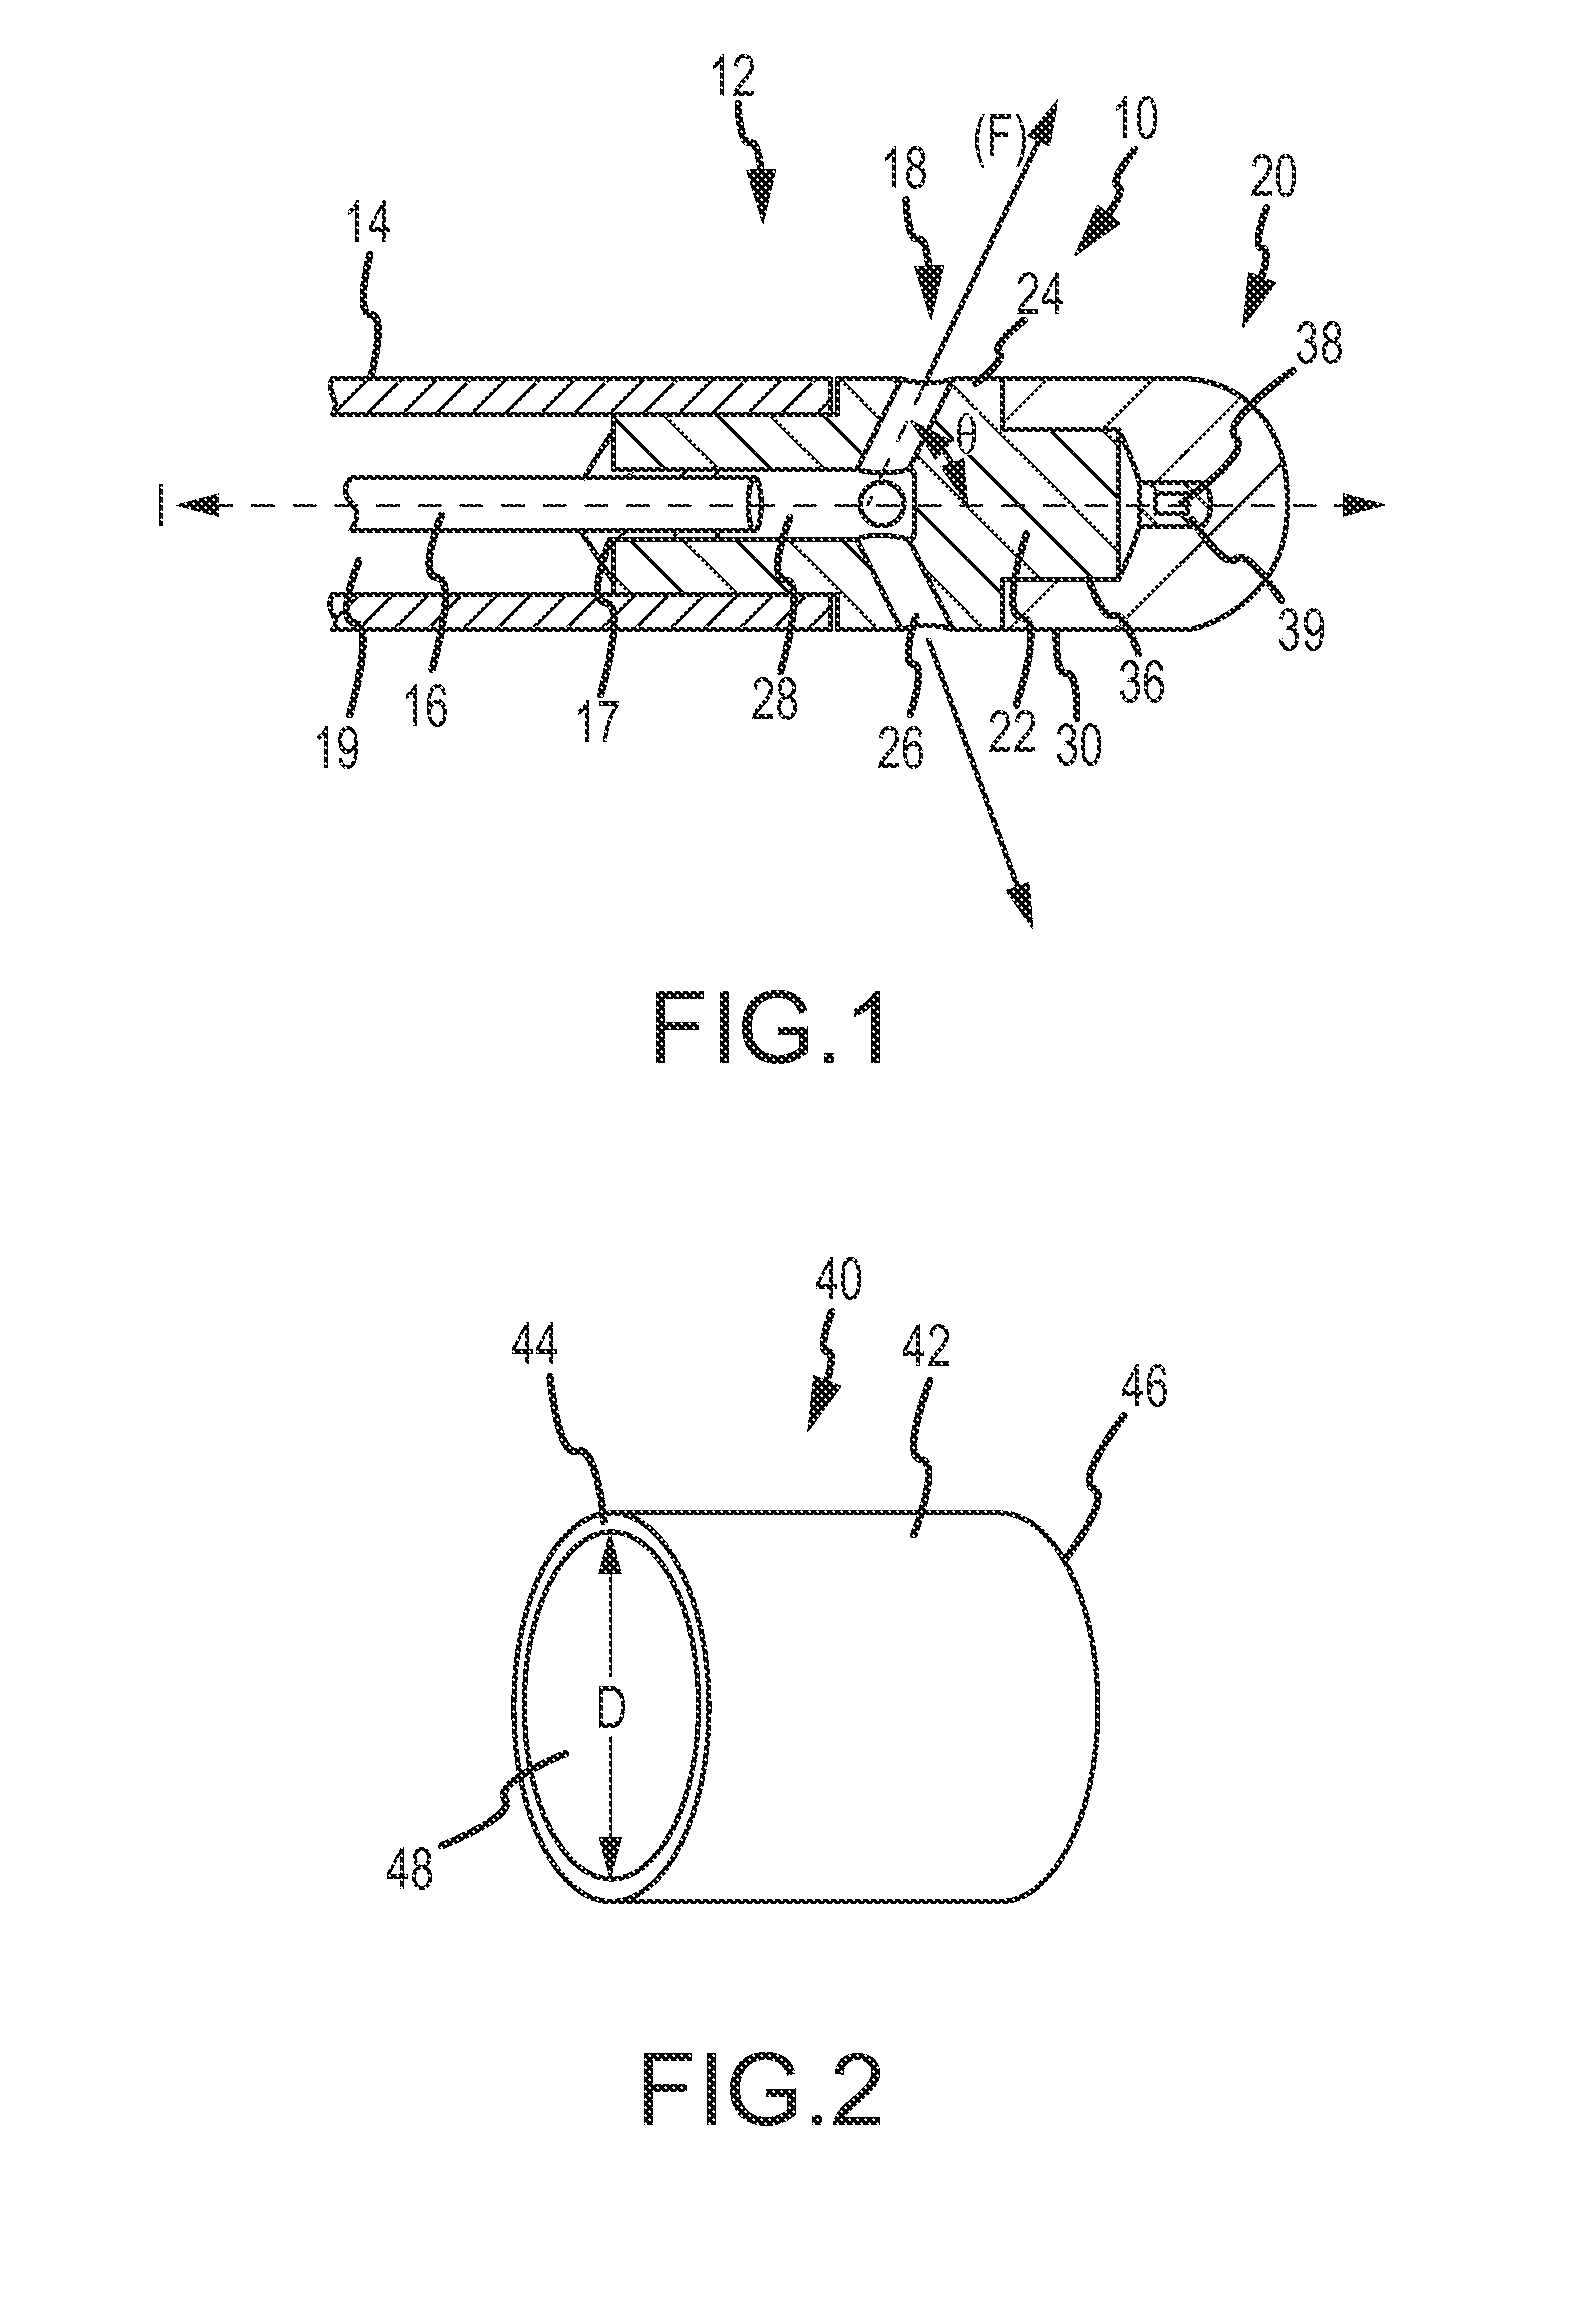 Irrigated ablation catheter assembly having a flow member to create parallel external flow